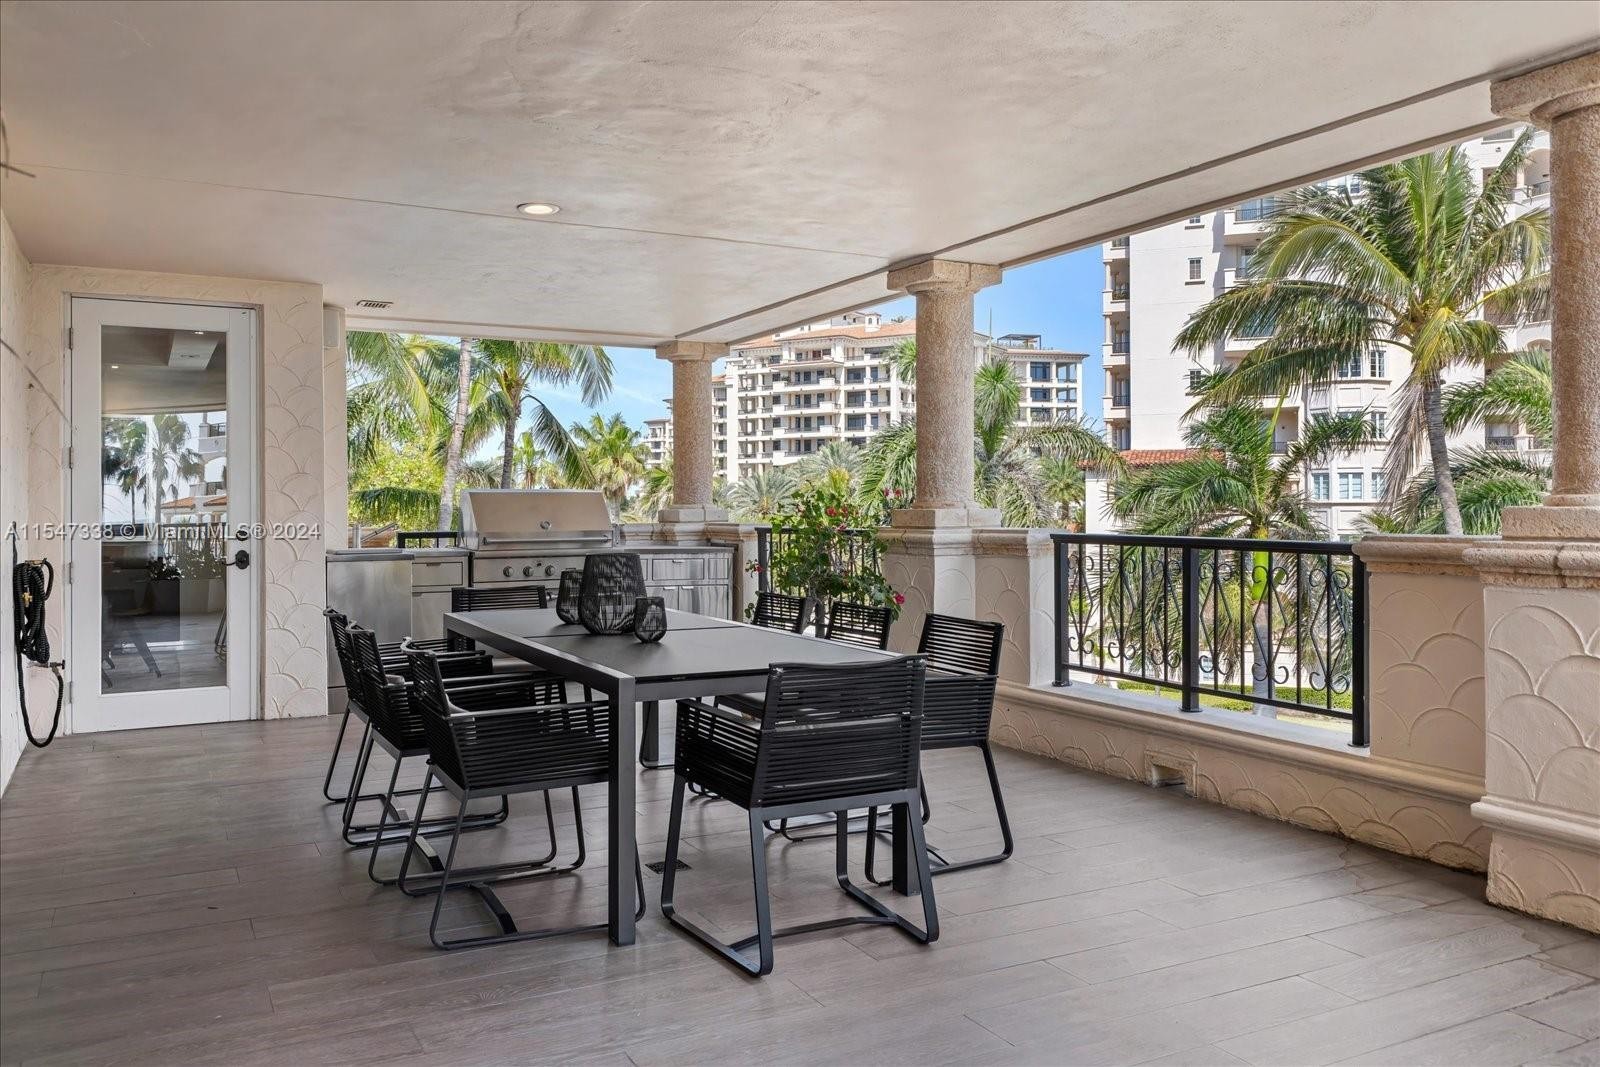 30. 7431 Fisher Island Dr